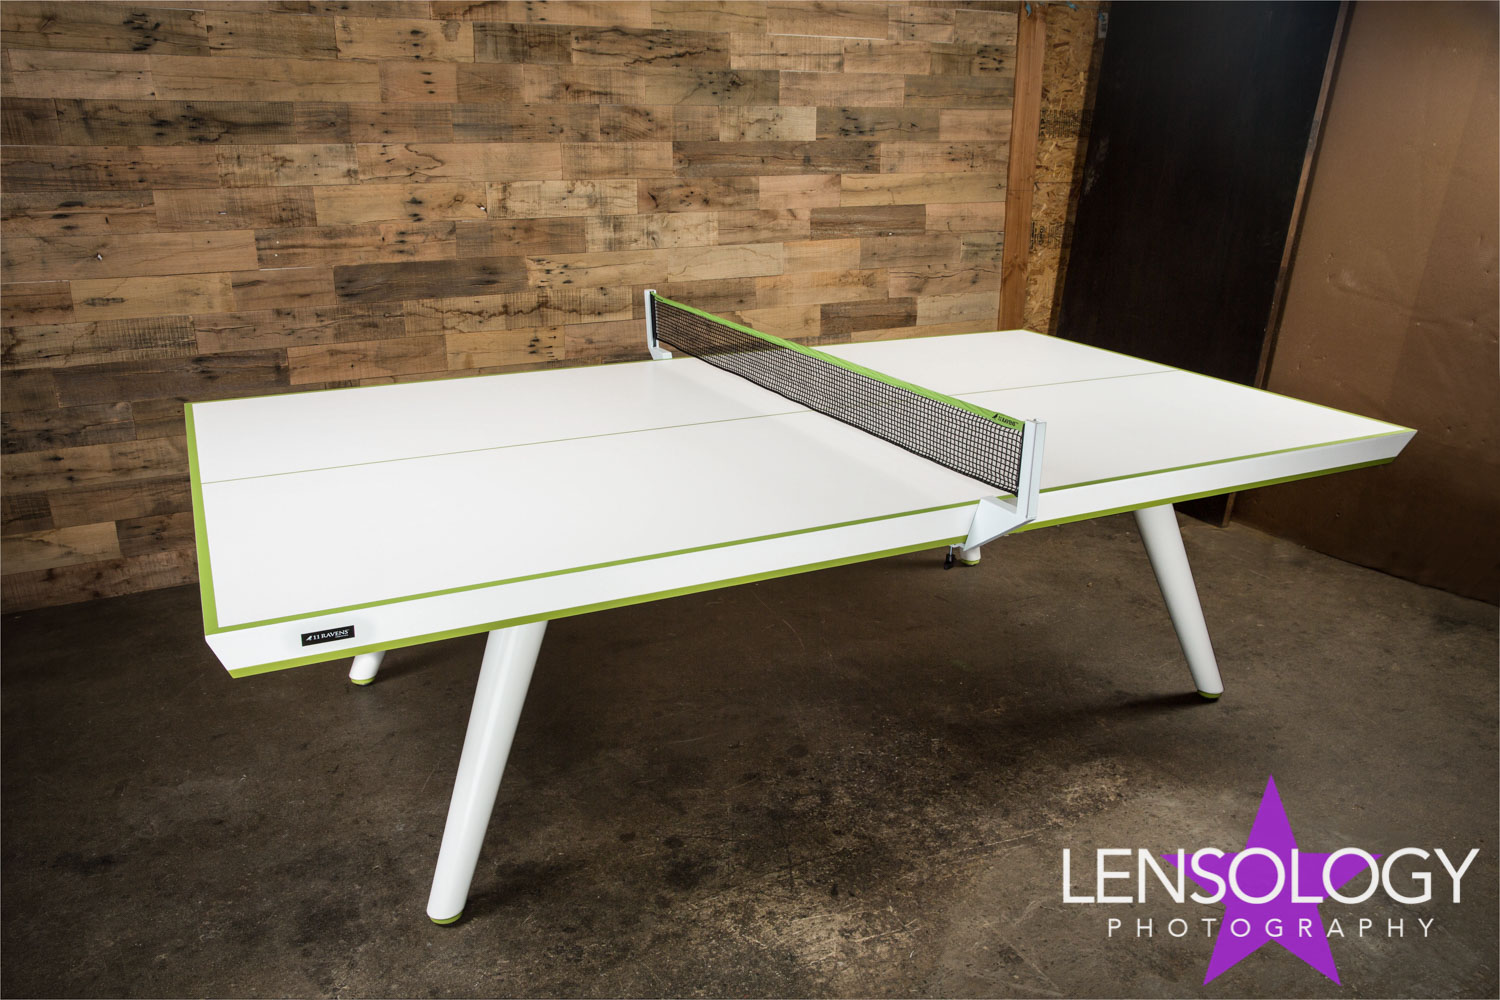 LENSOLOGY.NET - Product photography for 11 Ravens custom table tennis tables, LA, CA.
All images are copyright of Lensology.net
Email: info@lensology.net
www.lensology.net